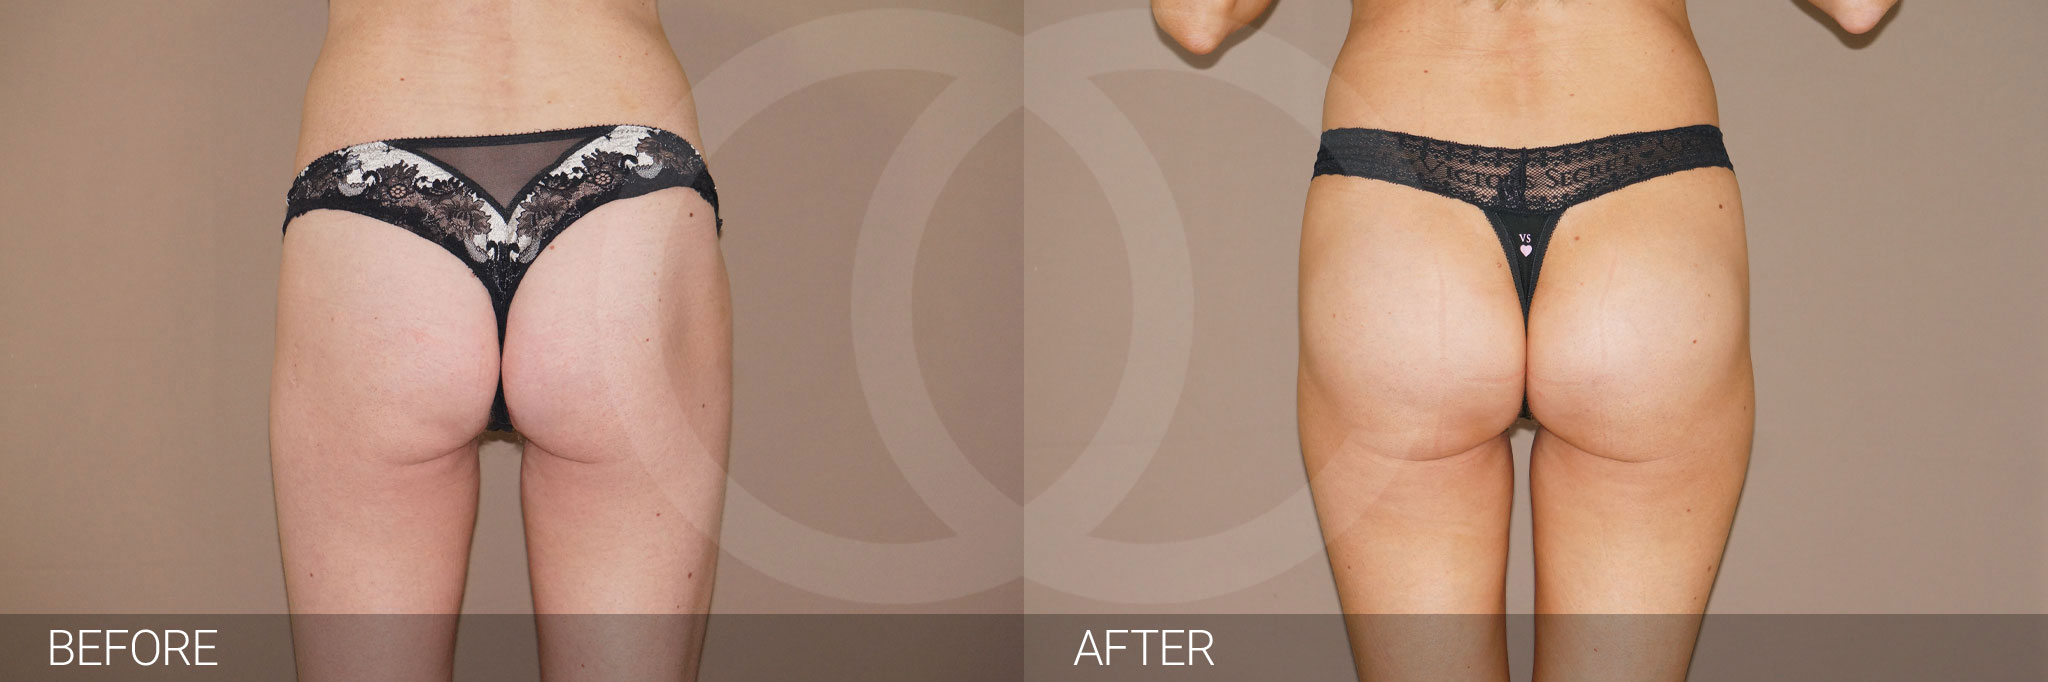 Buttock Augmentation Gluteal implants ante/post-op I